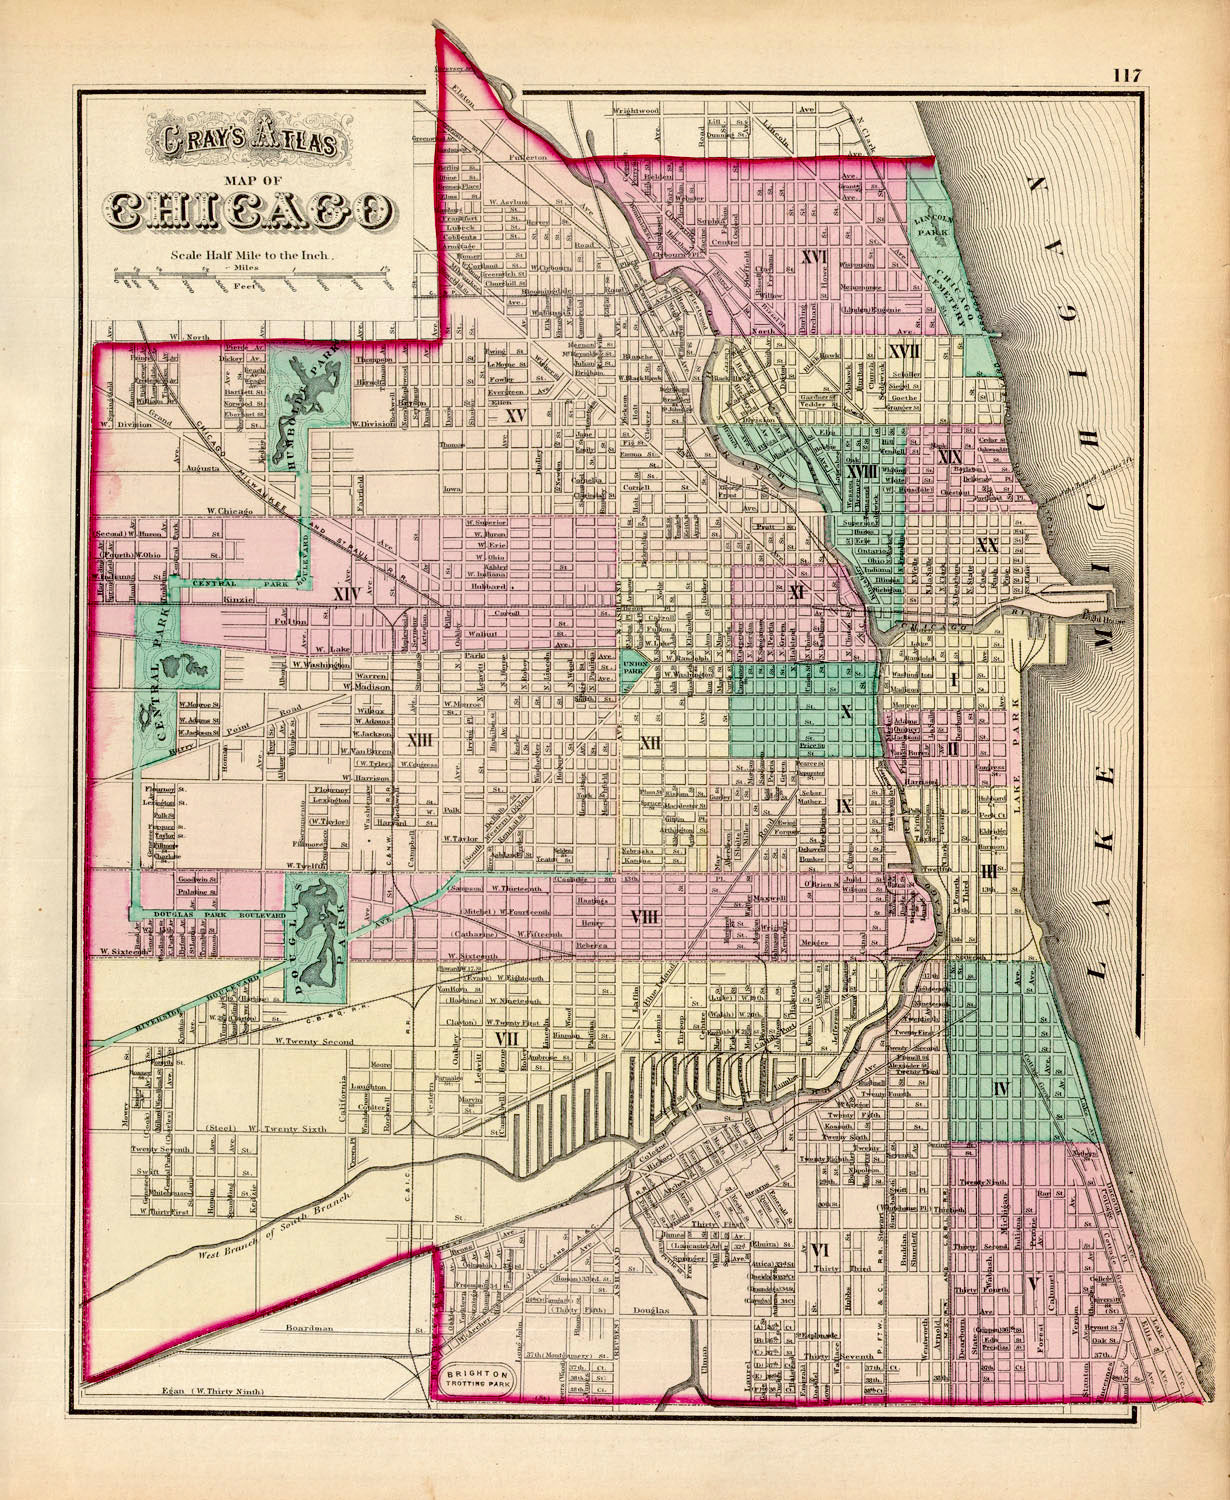 Map of Chicago Gray, 1874 It had recovered from a great fire in 1871 and it would face another smaller fire in this same year of 1874. With shoreline expanded by the ruble of the great conflagration, the city continues to grow with its trademark tenacious endurance. Blocks that had been levelled are again defined, and the green belt of parks and boulevards begin to ring the entire town. Condition is very good. Image size is approximately 15.75 x 13 (inches)  